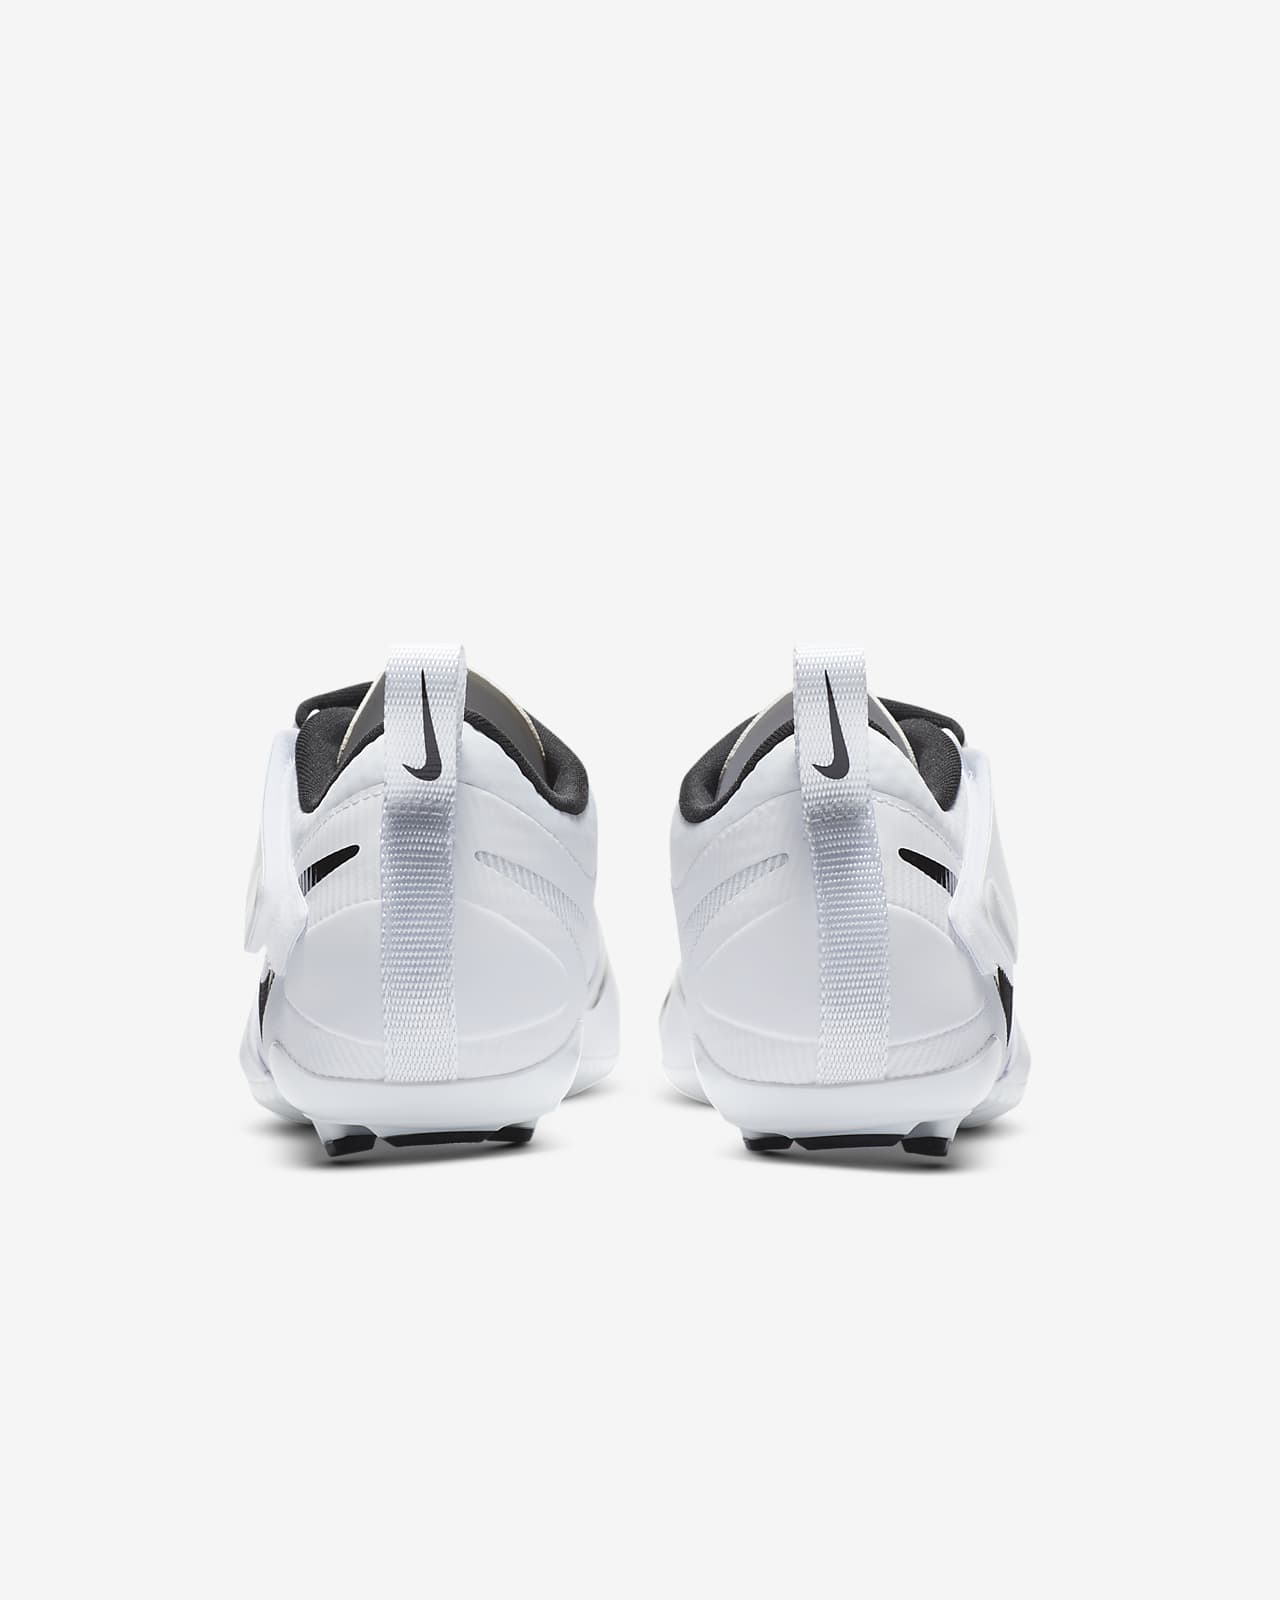 white out nike shoes